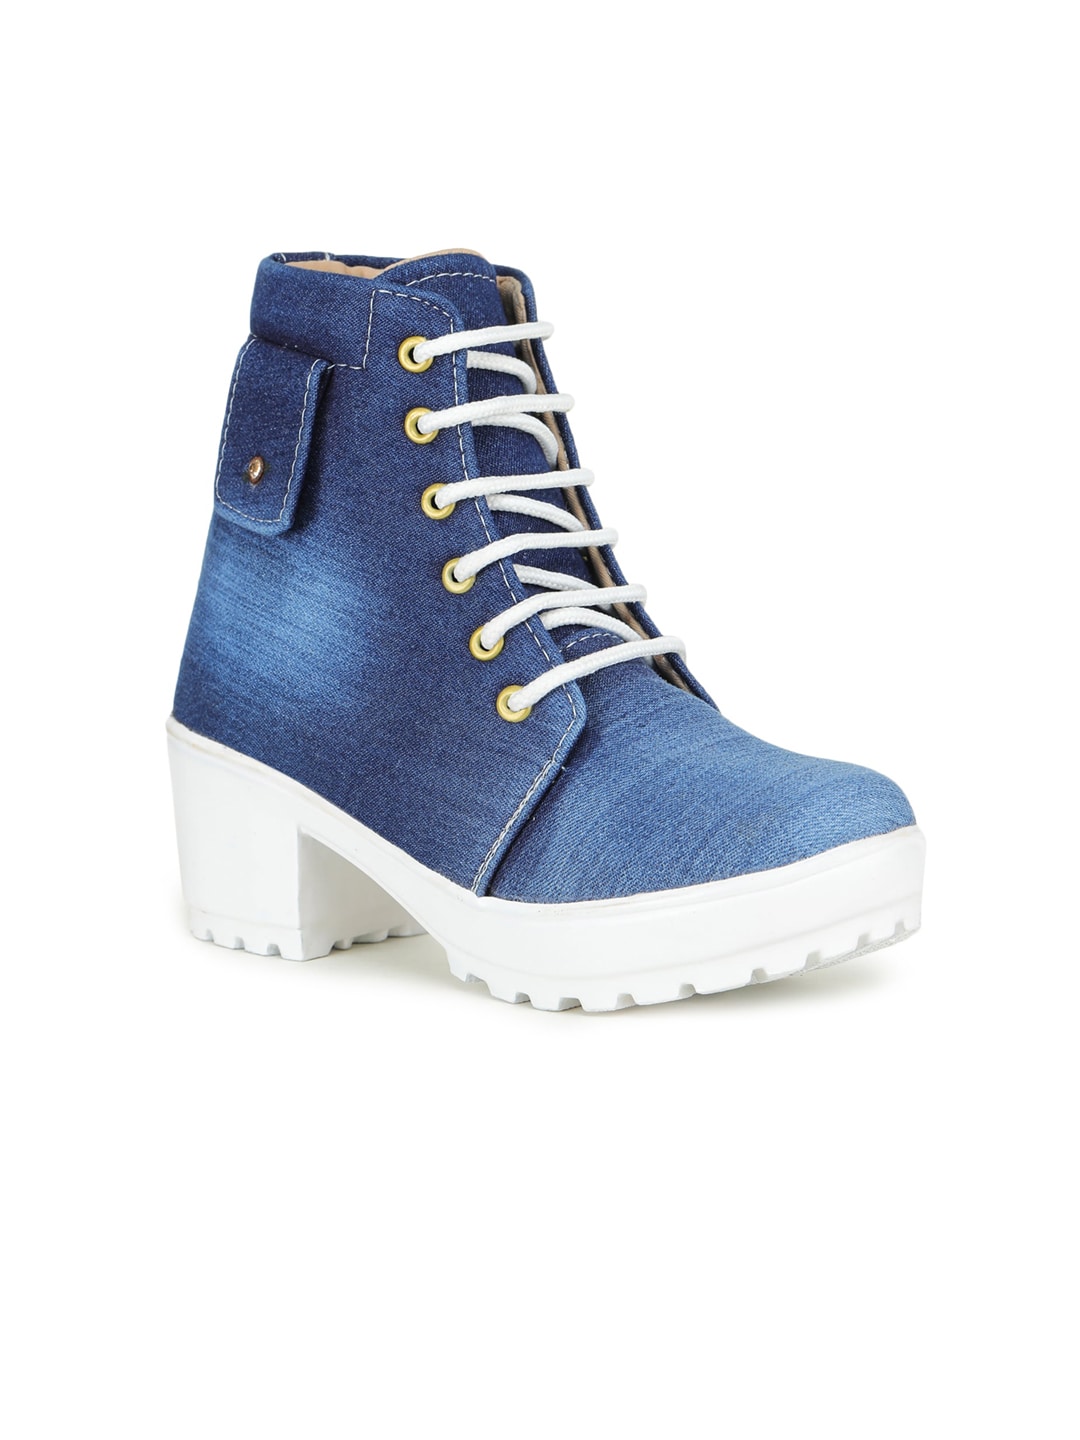 SAPATOS Women Blue Boots Price in India